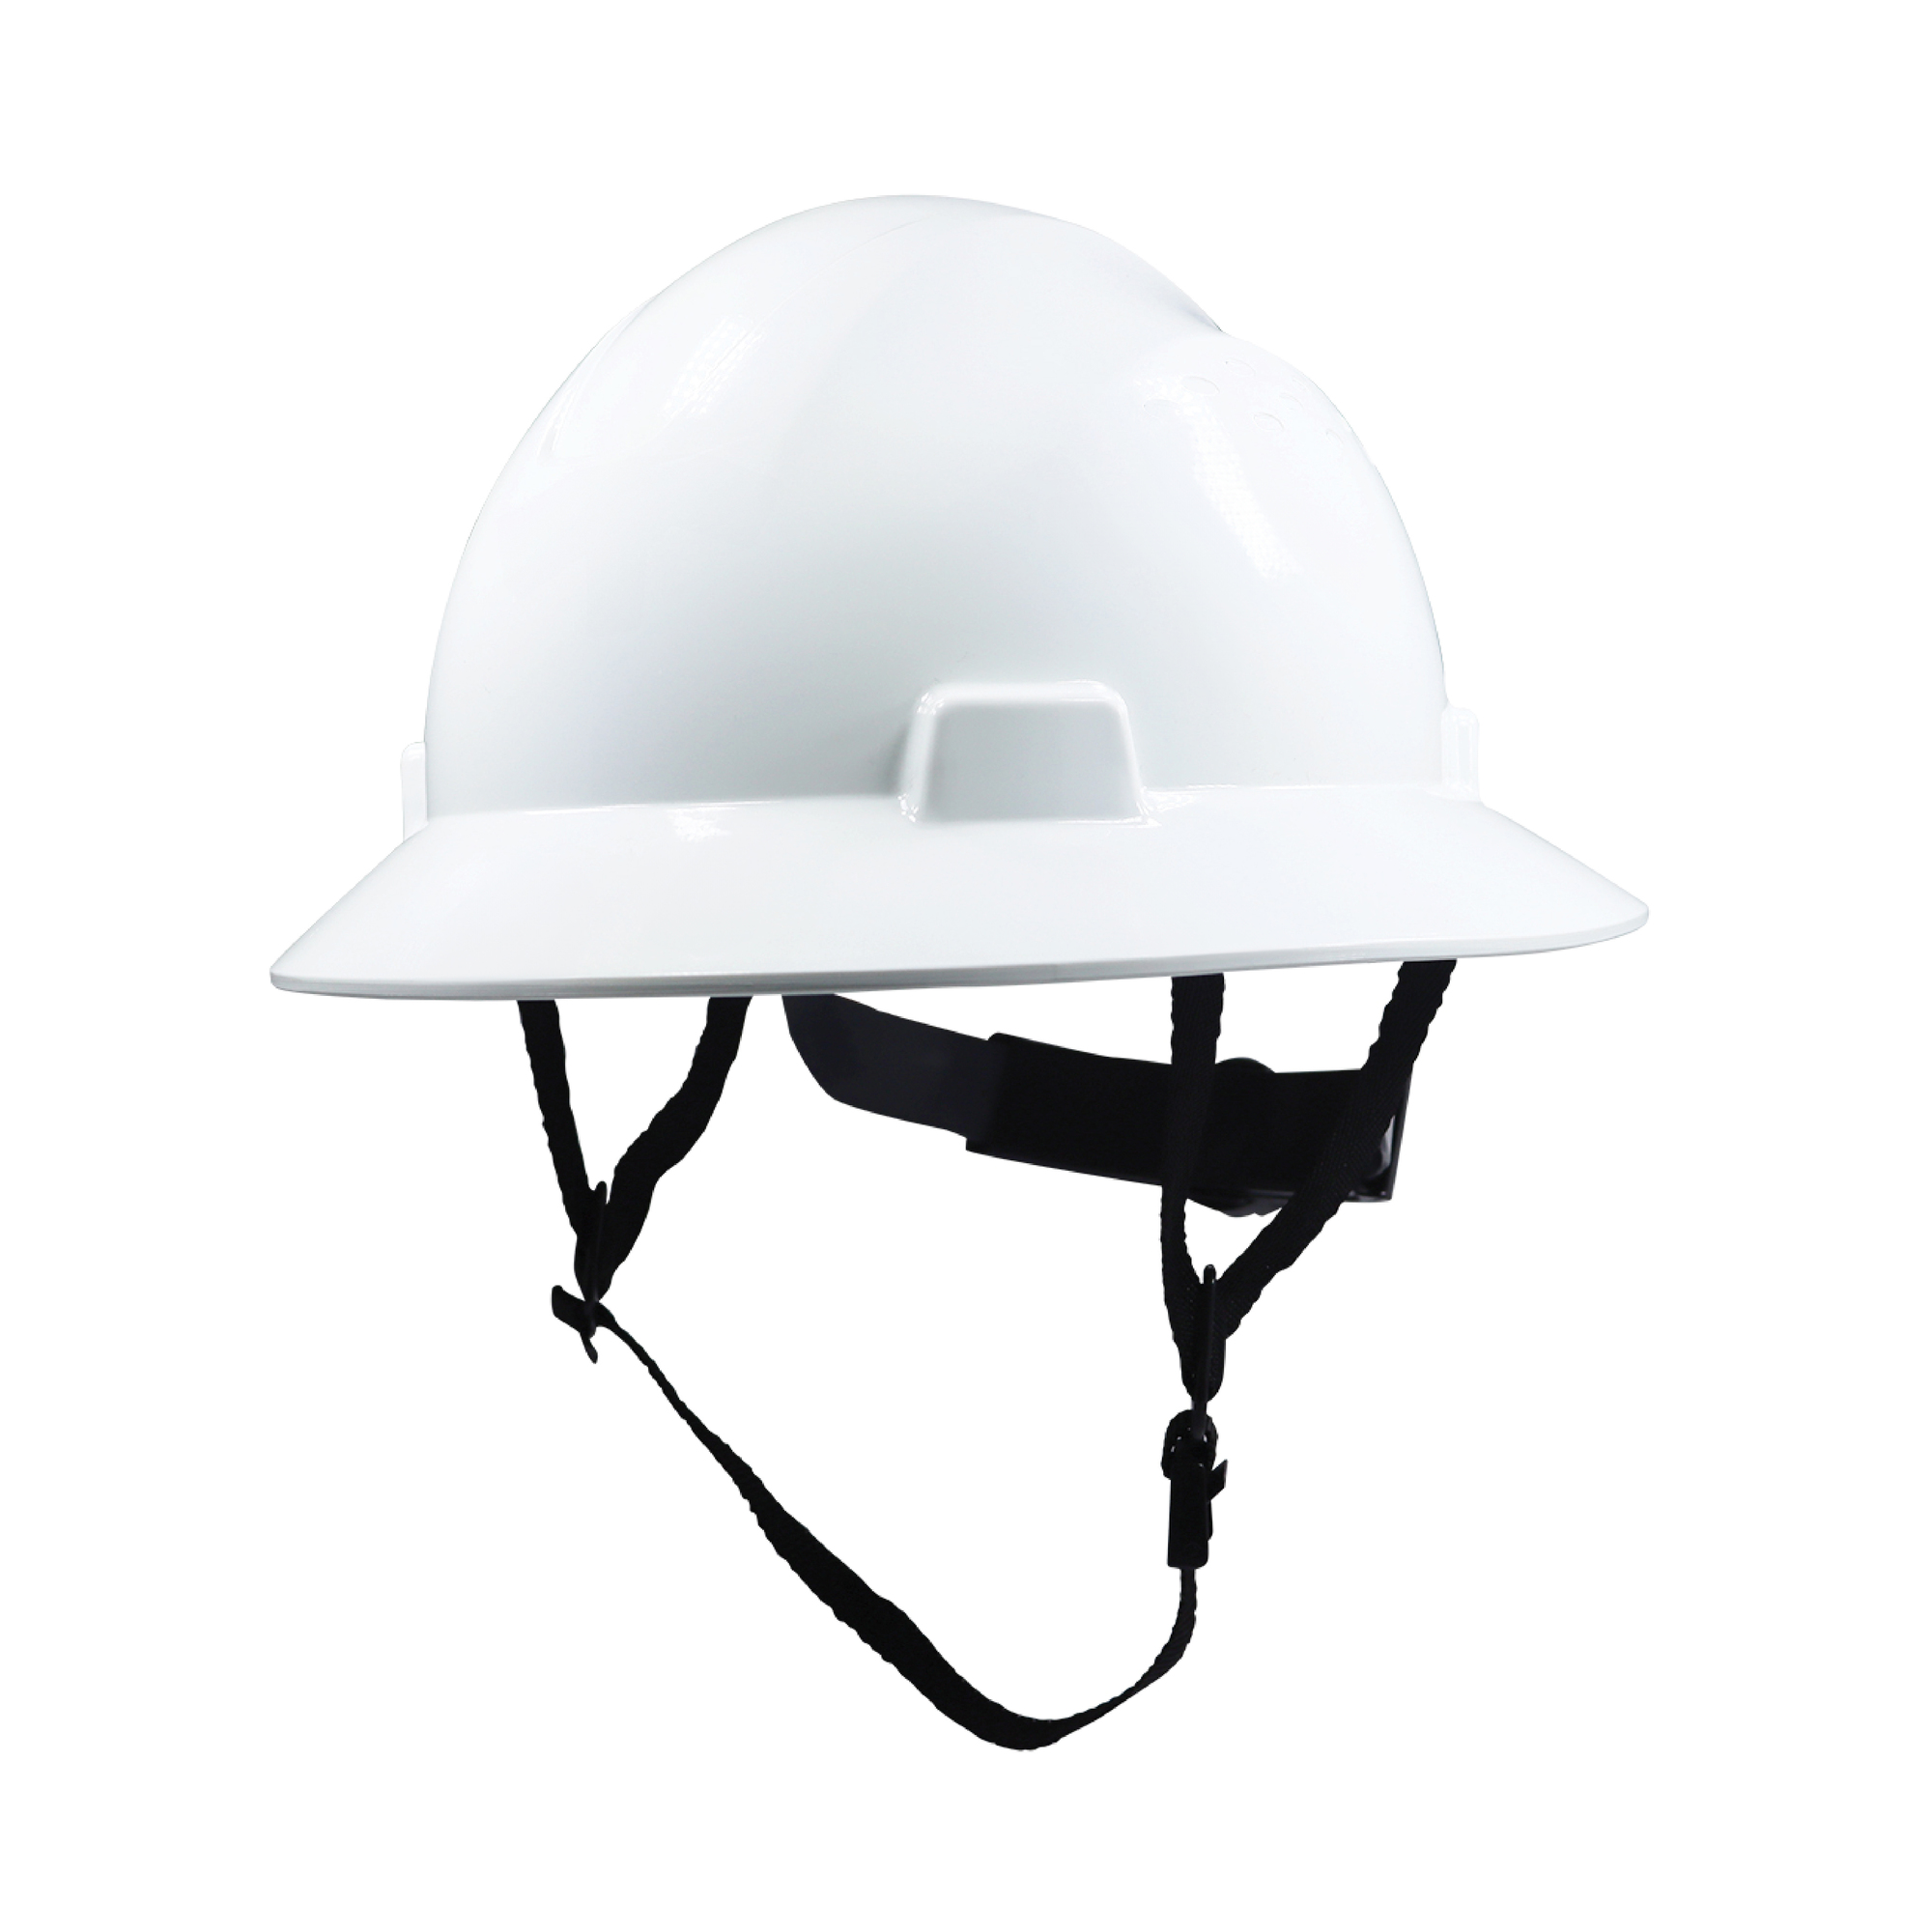 General Electric, WHITE FULL BRIM HARD HAT NON-VENTED, Size One Size, Color White, Hat Style Full Brim, Model GH329W